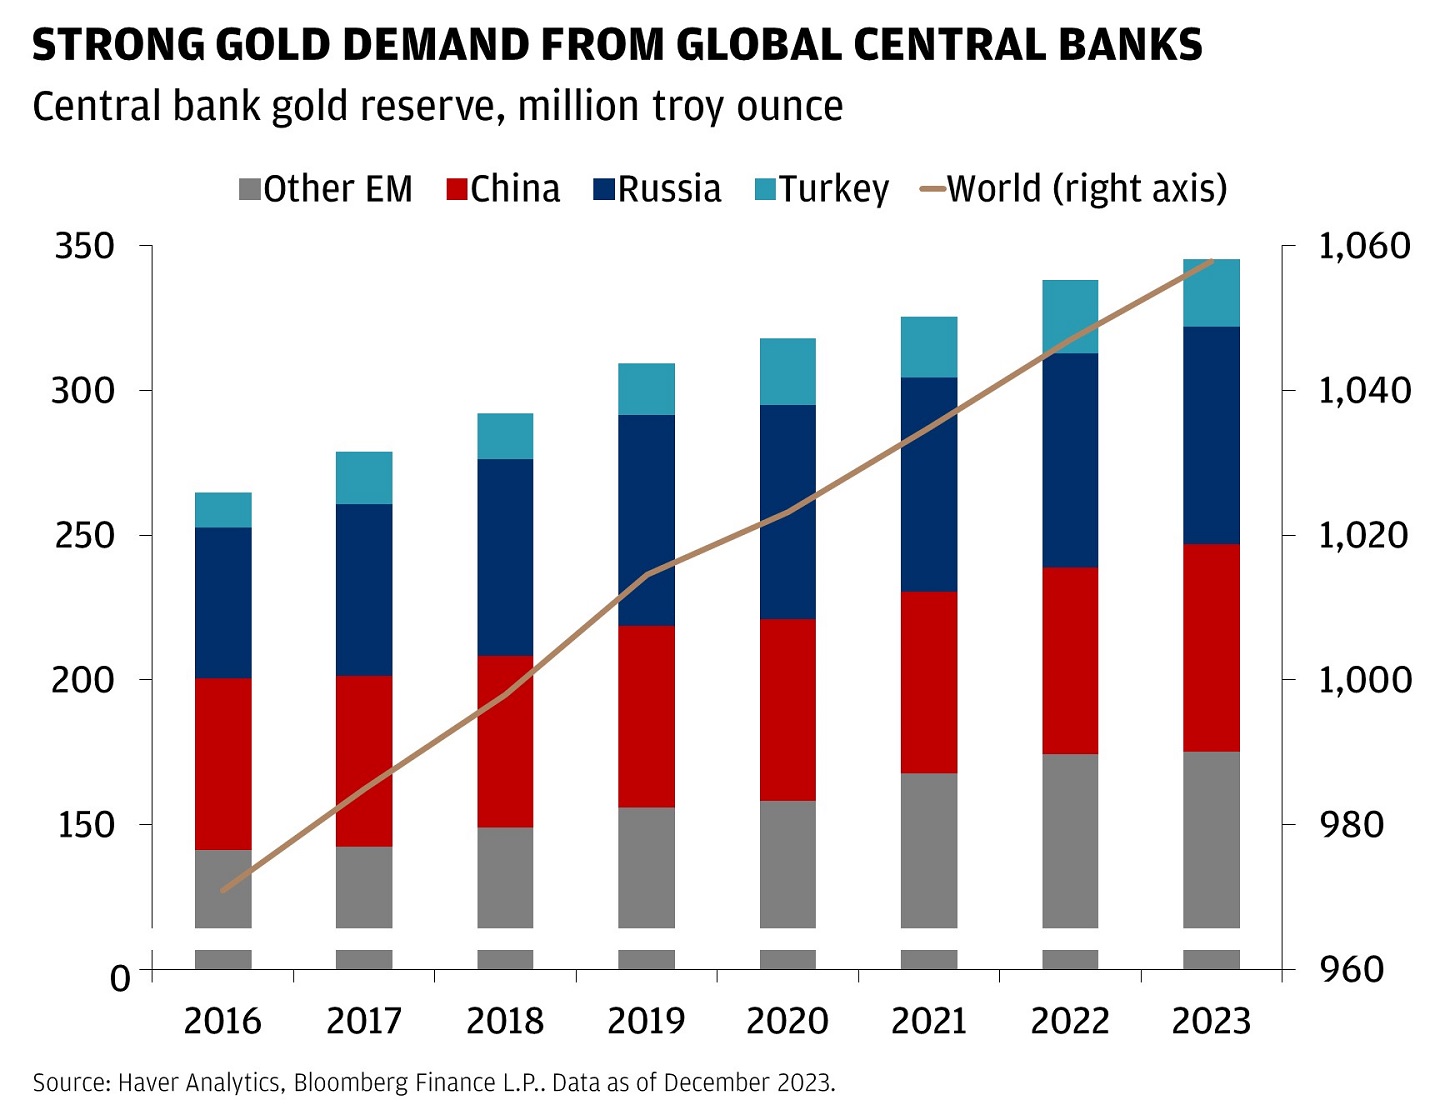 This graph shows the central bank gold reserve levels from 2016 to 2023 in million troy ounce.